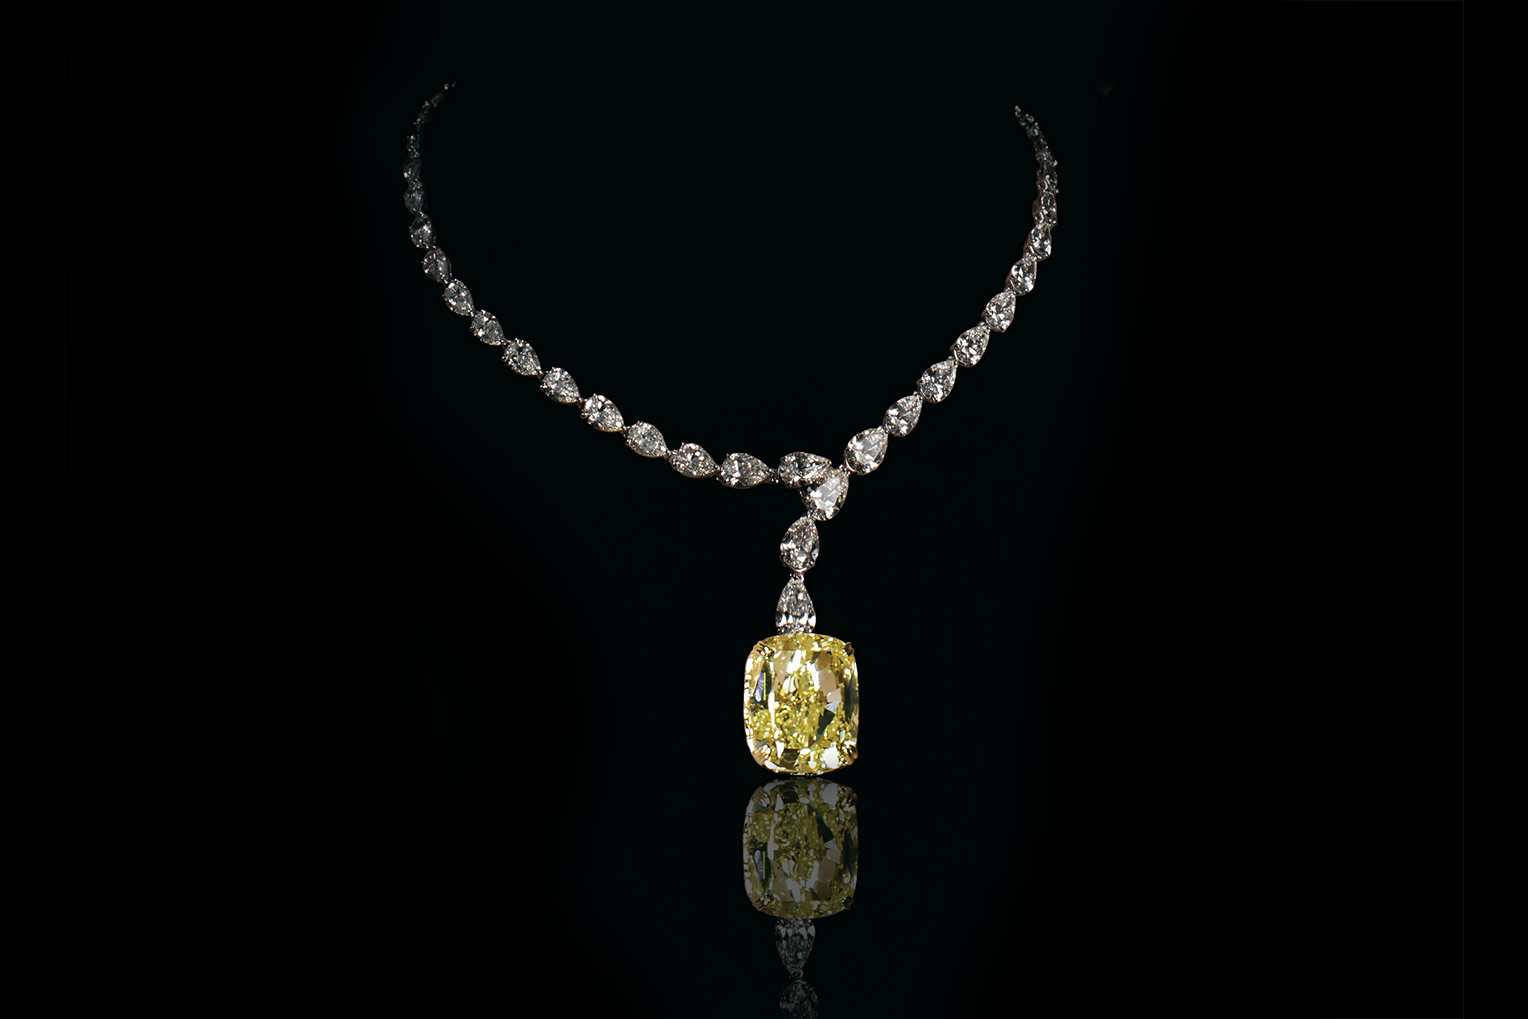 Solaris Star necklace with a 40-carat yellow diamond and 75 colourless diamonds by Jaipur Gems